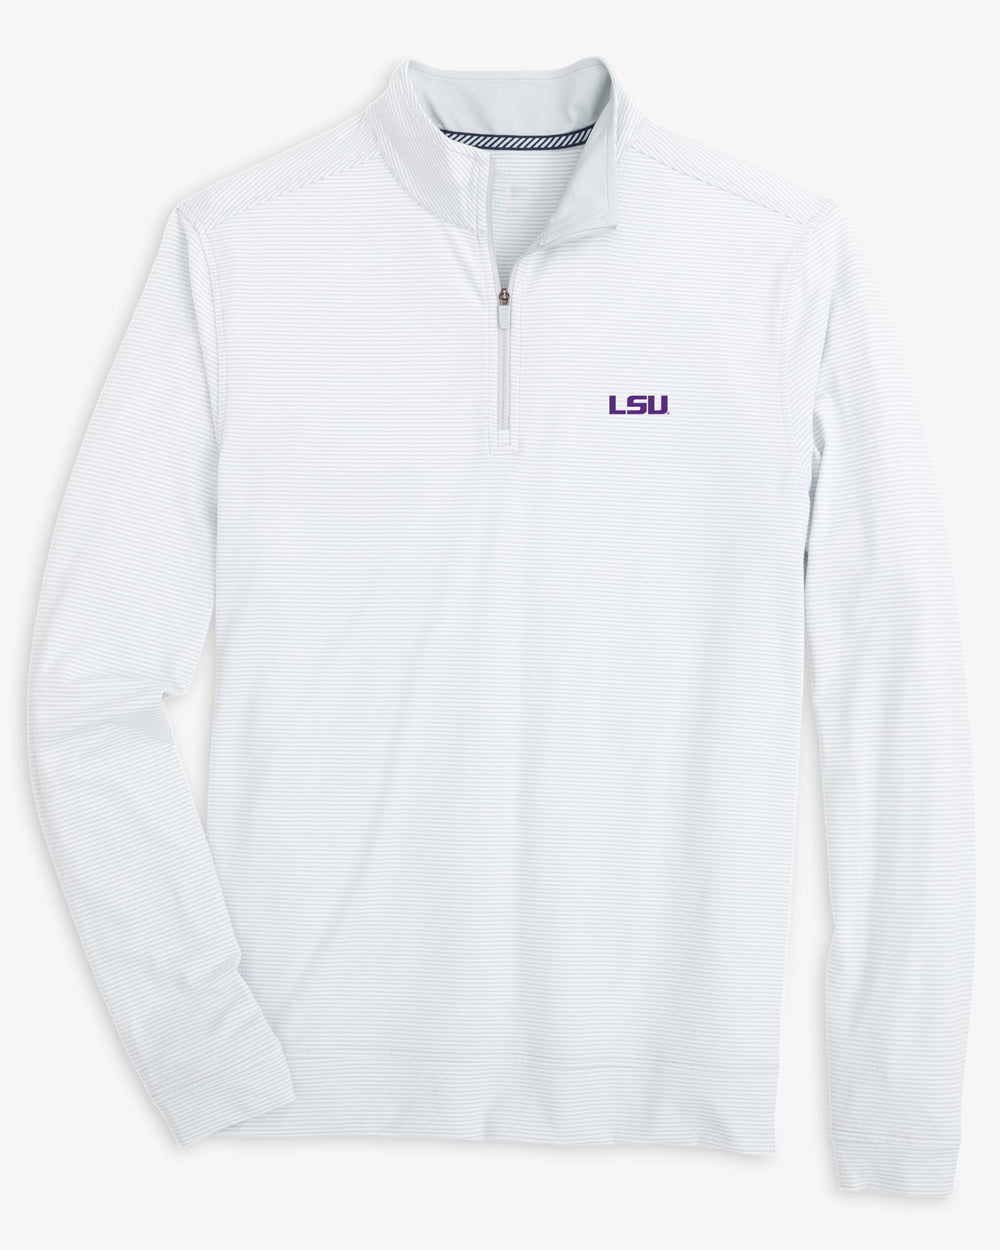 The front view of the LSU Tigers Cruiser Micro-Stripe Heather Quarter Zip by Southern Tide - Heather Slate Grey